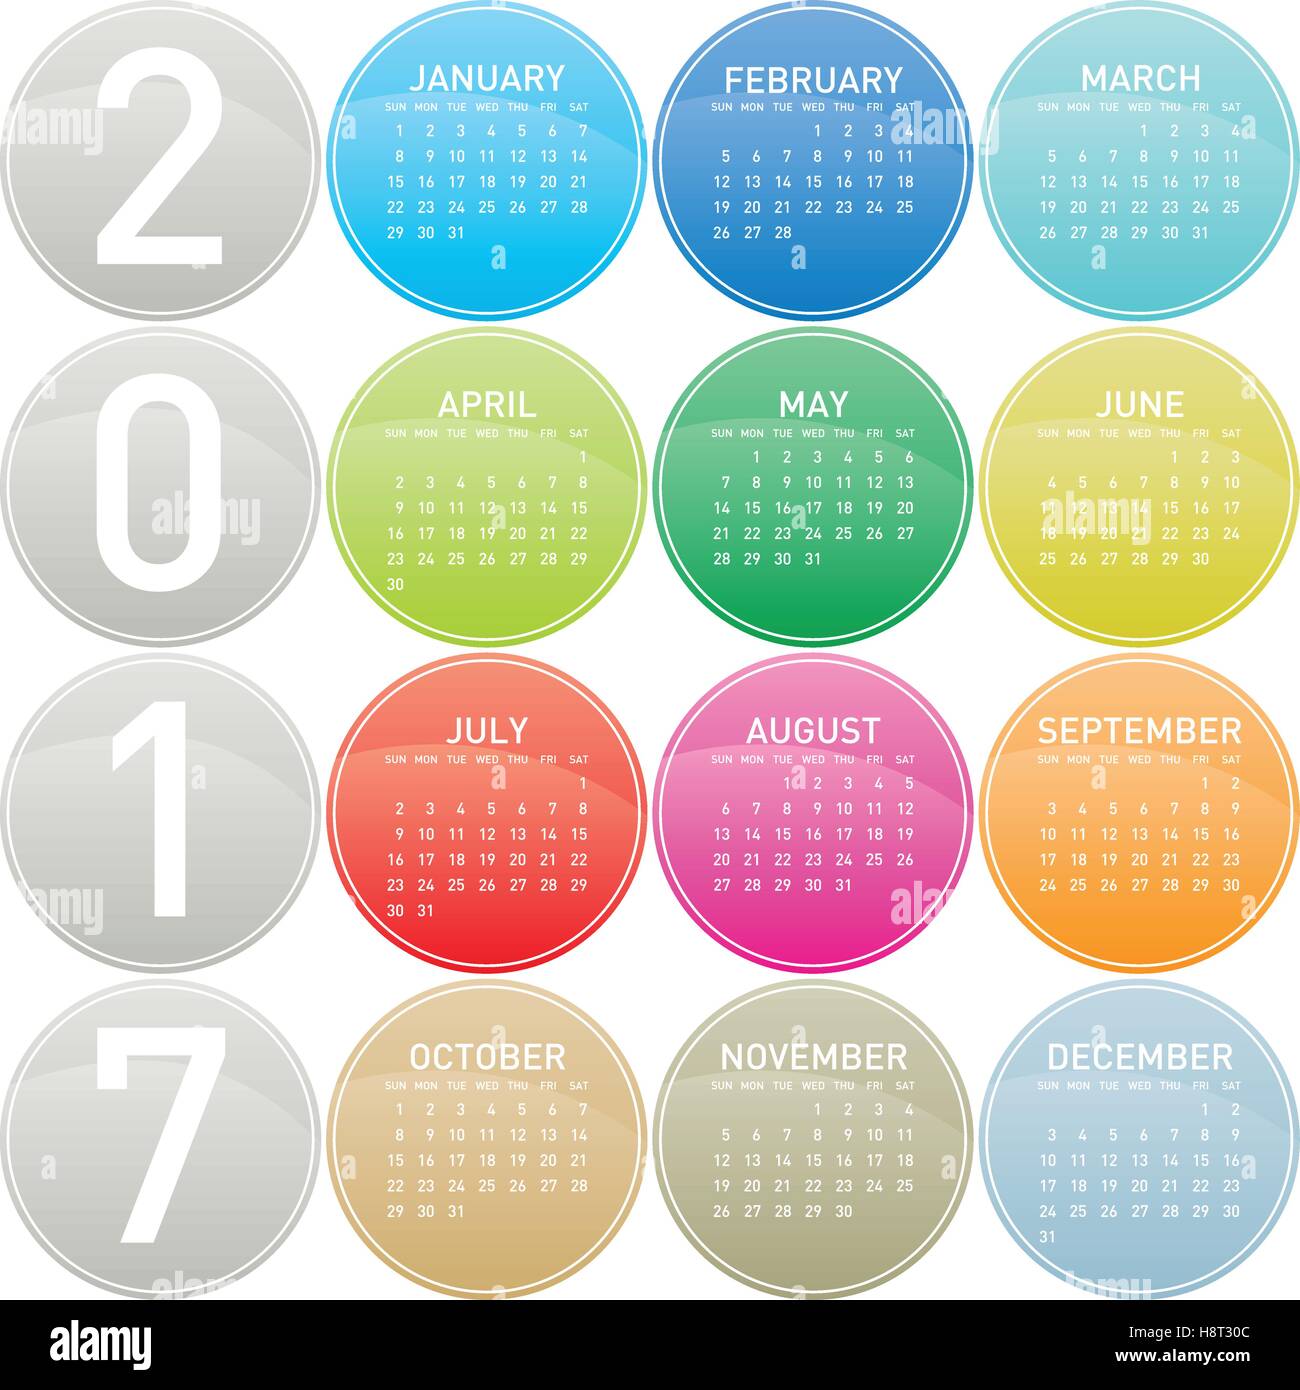 Colorful Calendar for year 2017 in a circles theme, in vector format. Stock Vector